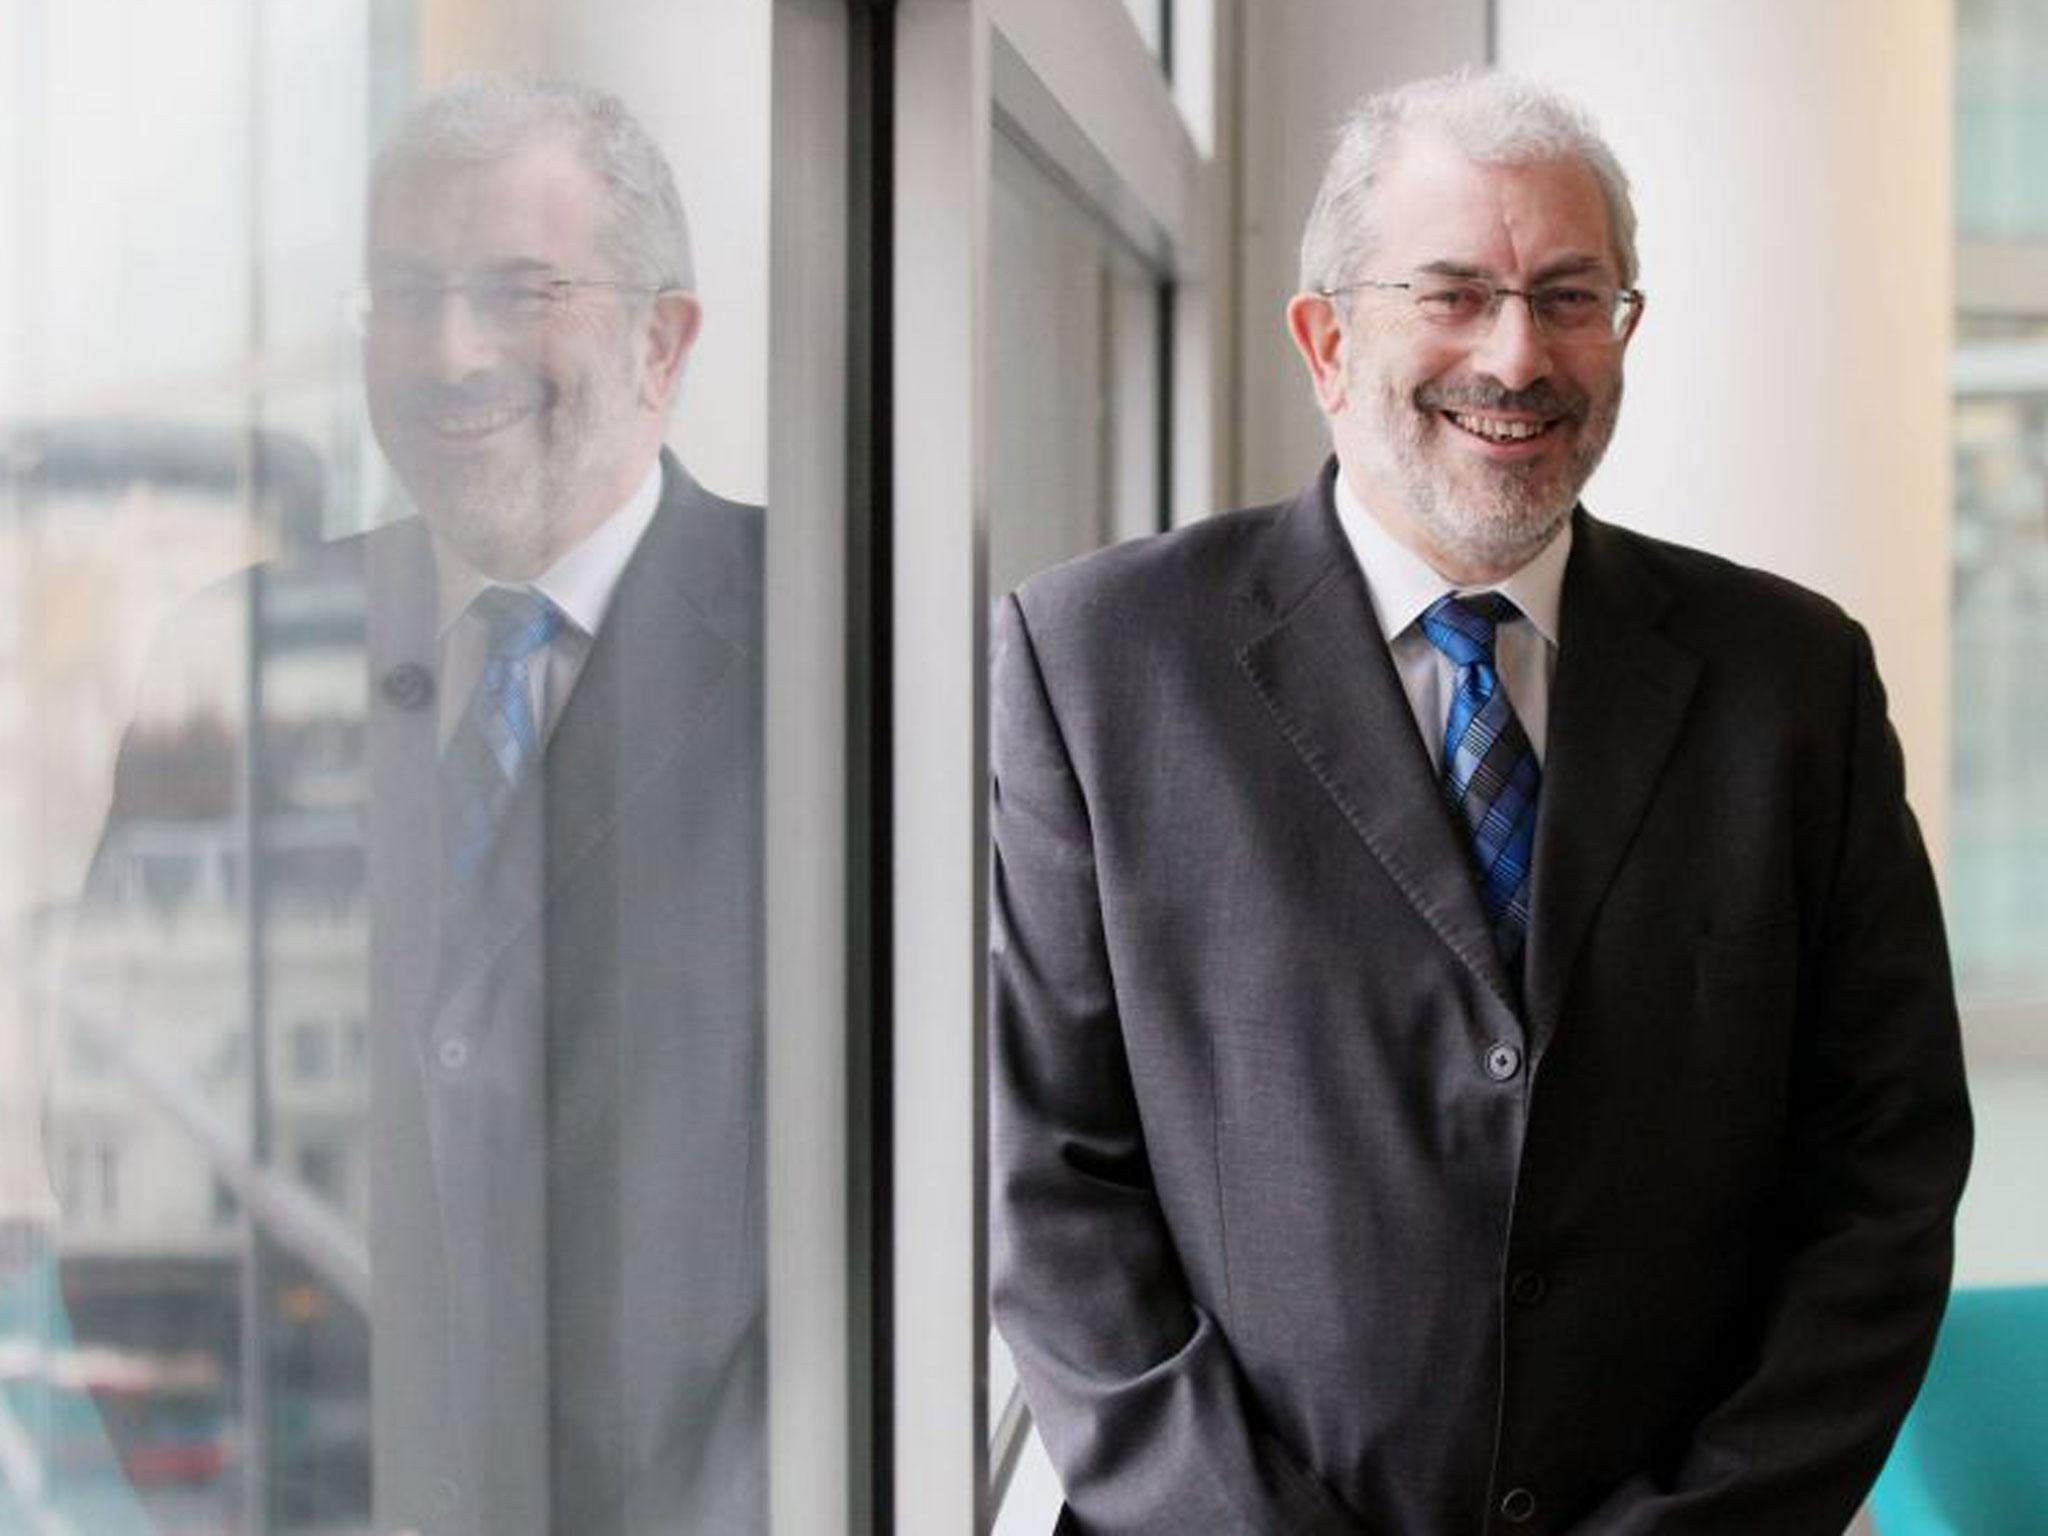 Lord Kerslake is also the former head of the civil service